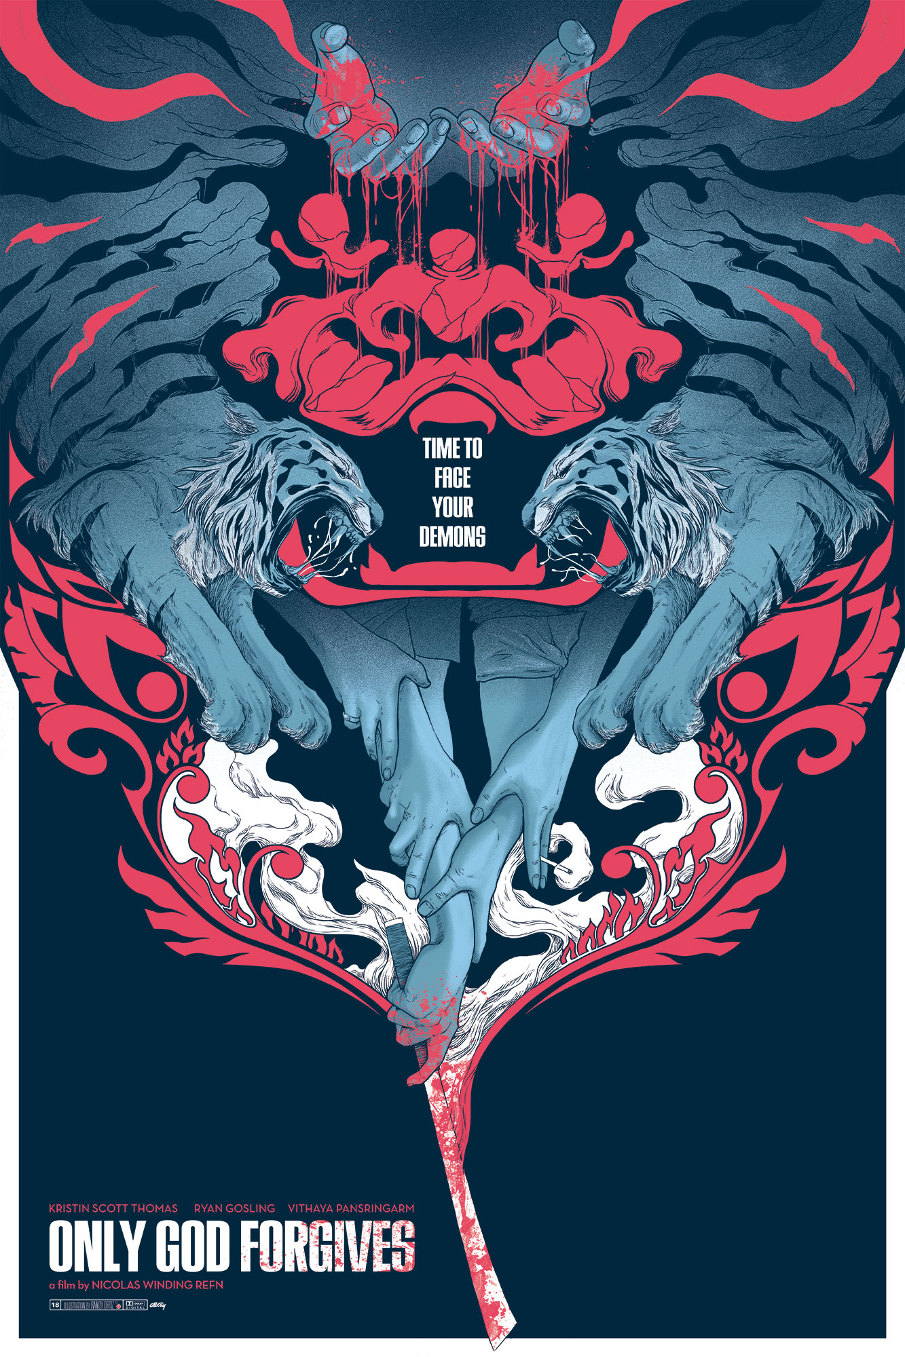 “Only God Forgives” by Randy Ortiz | 411posters